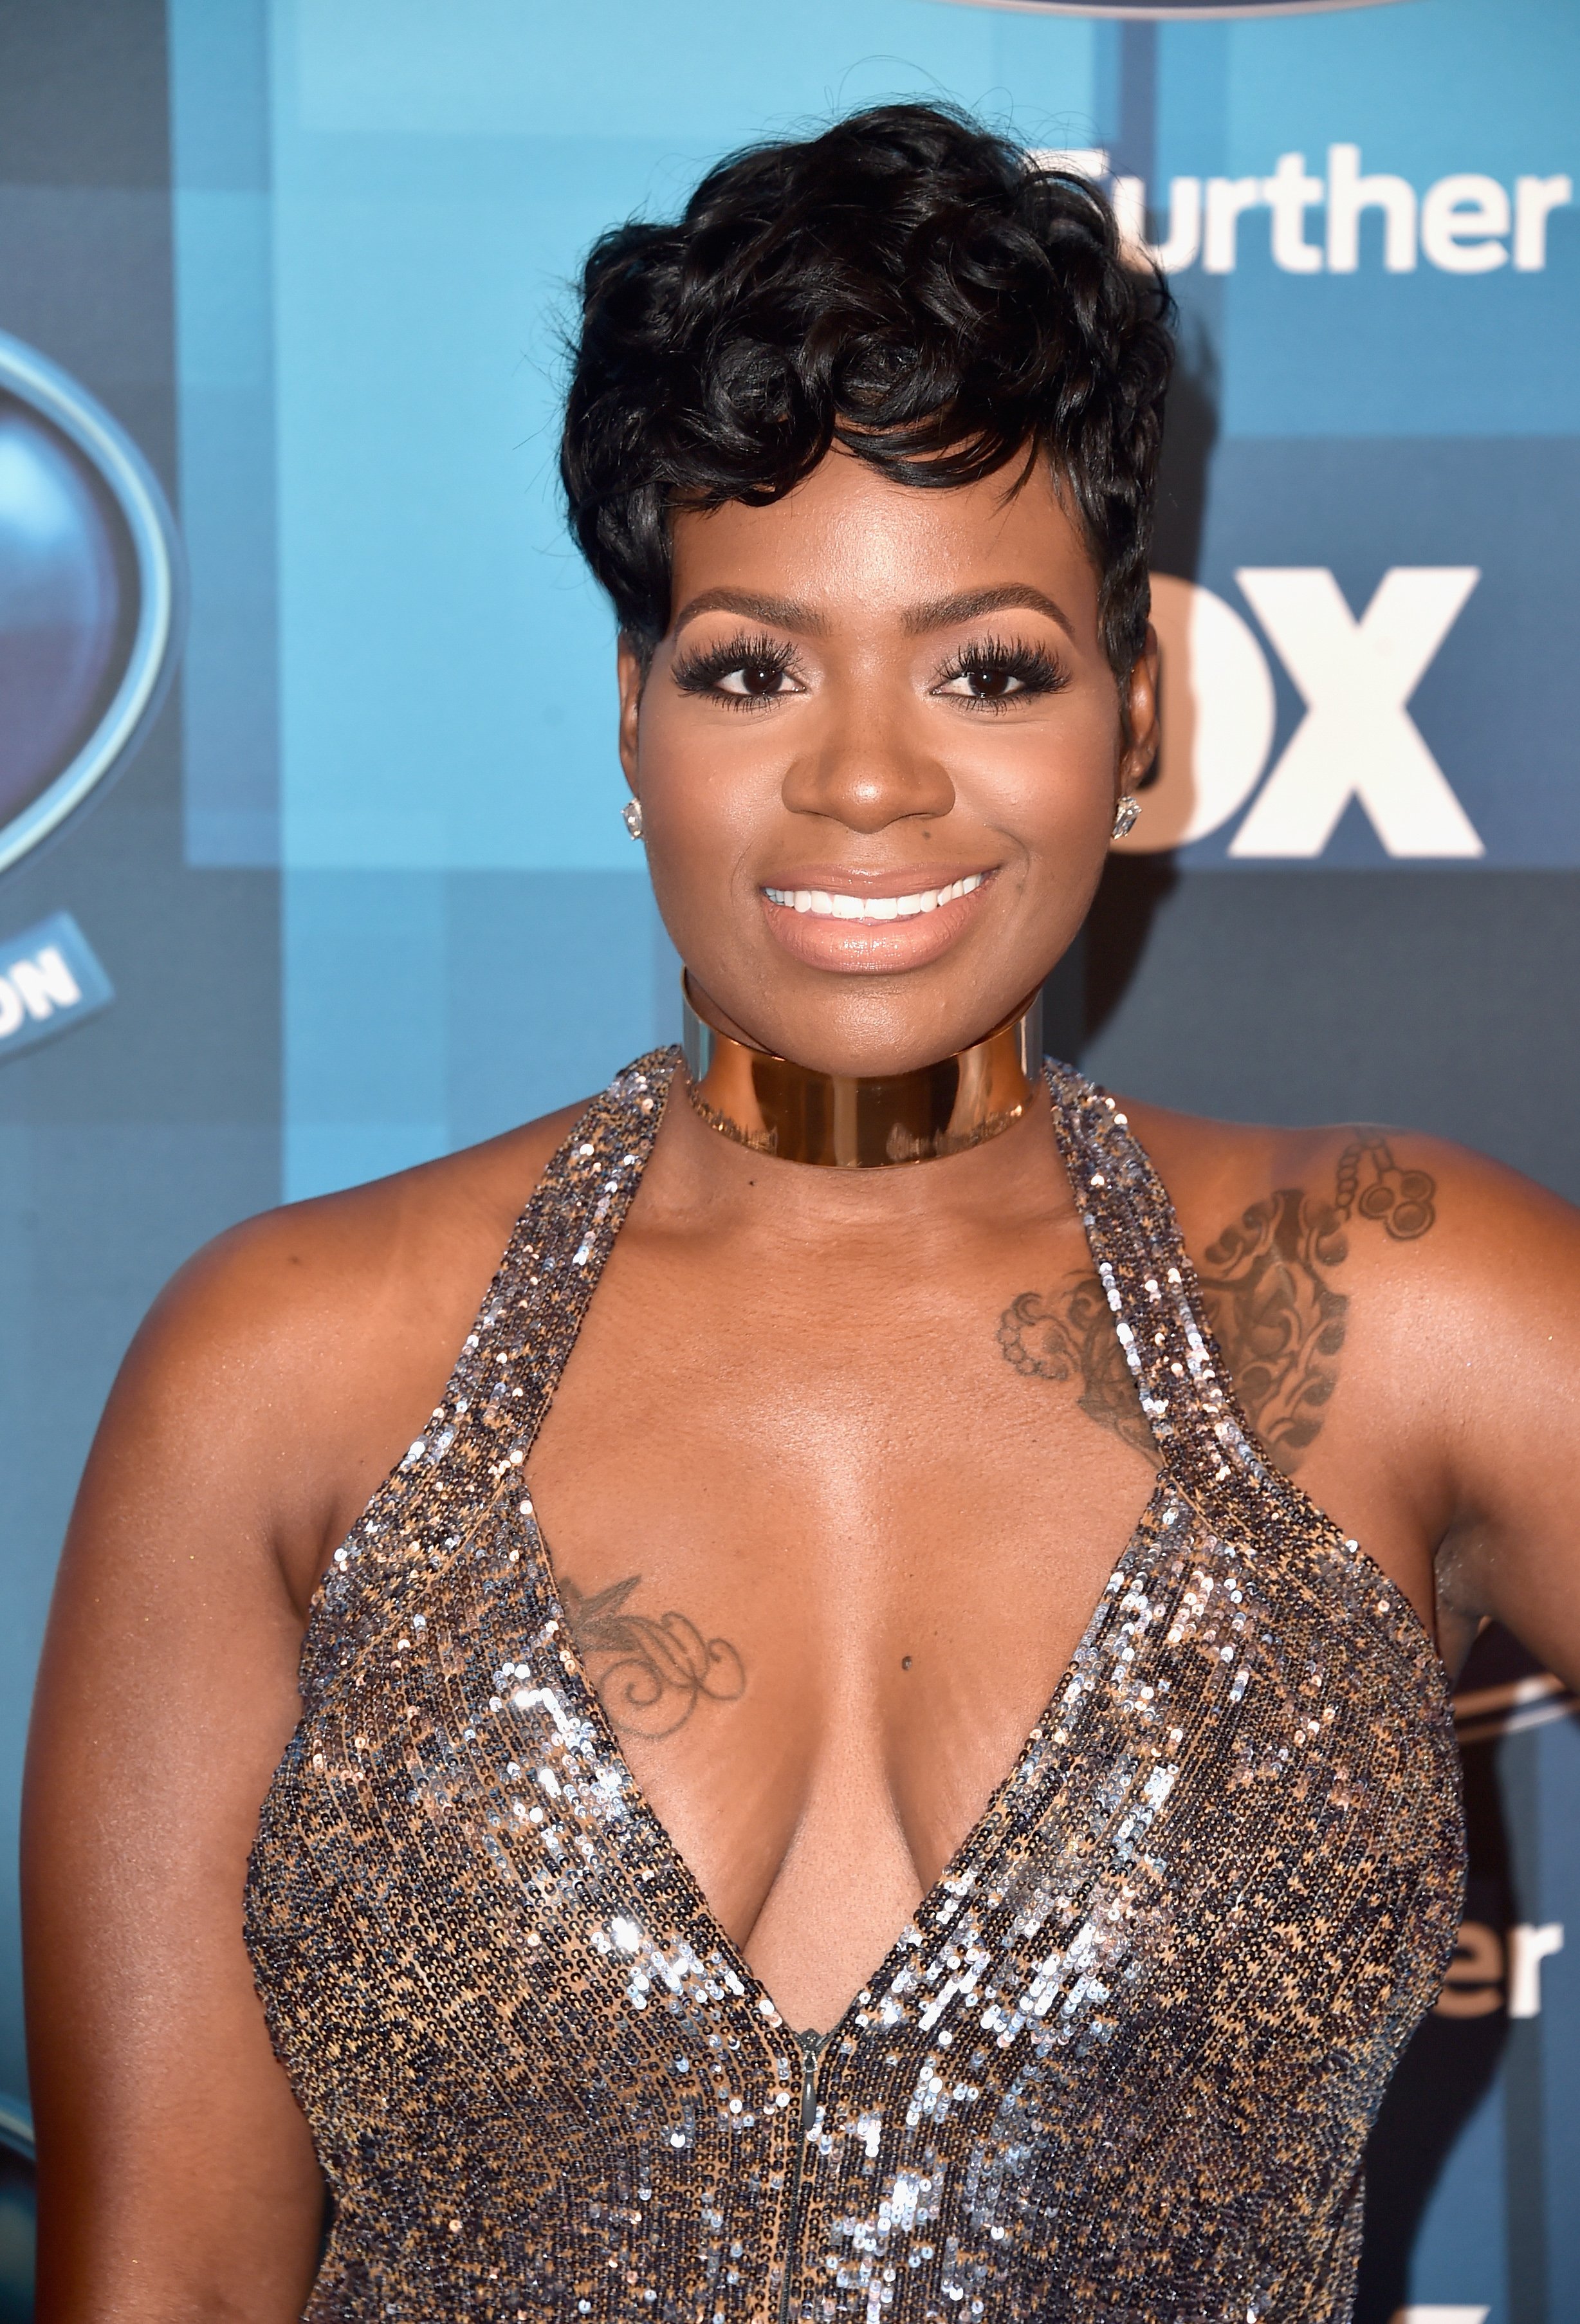 Fantasia Barrino at "American Idol" Finale For The Farewell Season on April 7, 2016 in California | Photo: Getty Images